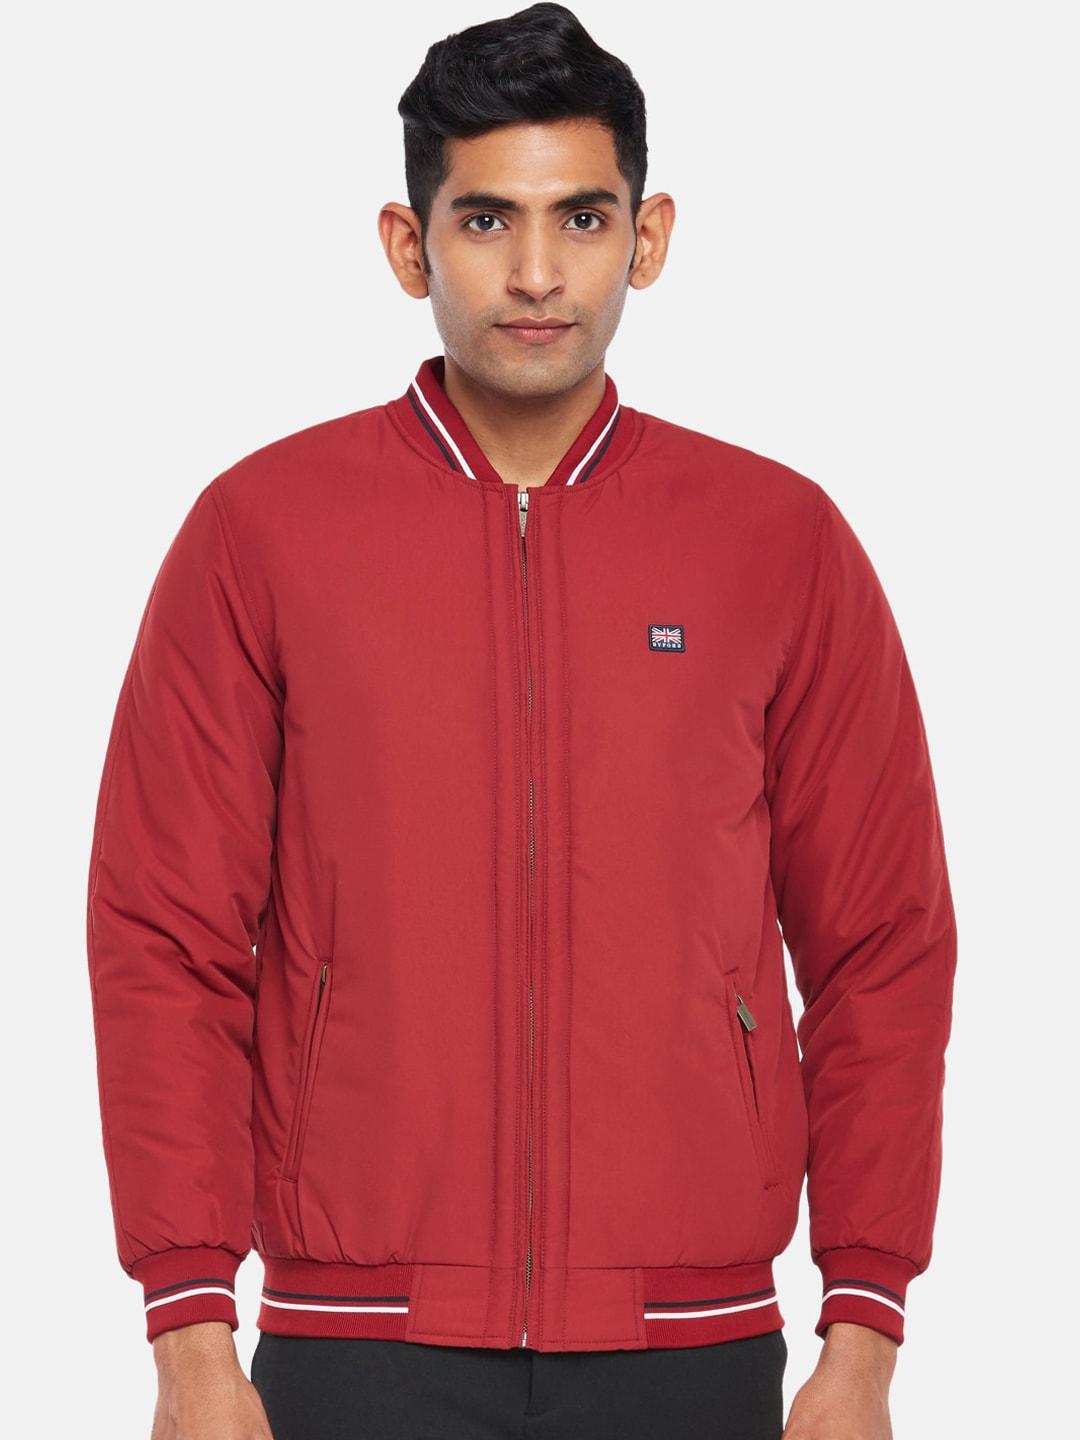 byford-by-pantaloons-men-red-solid-outdoor-bomber-jacket